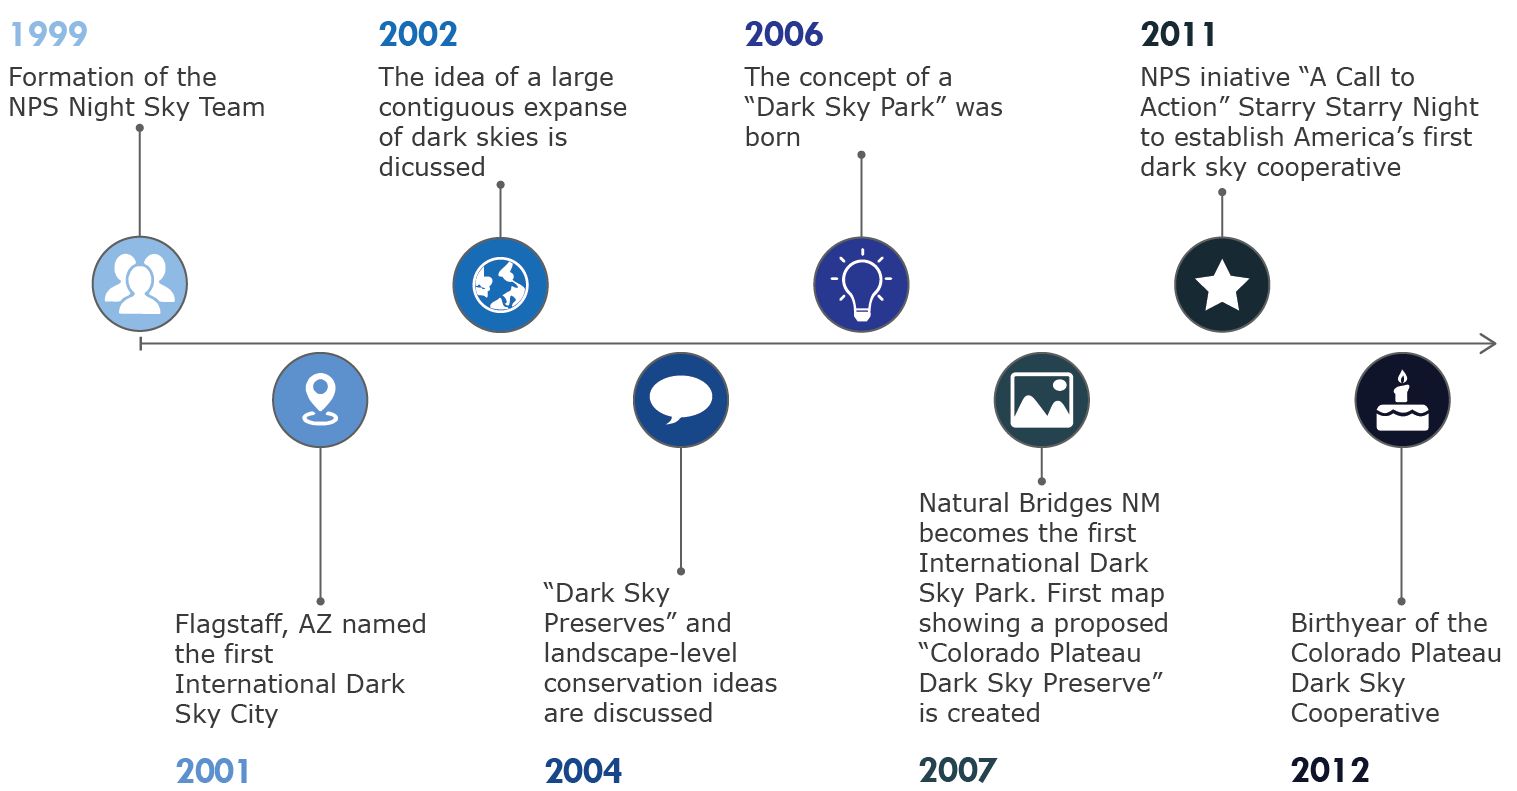 Historic timeline of the formation of the Colorad Plateau Dark Sky Cooperative